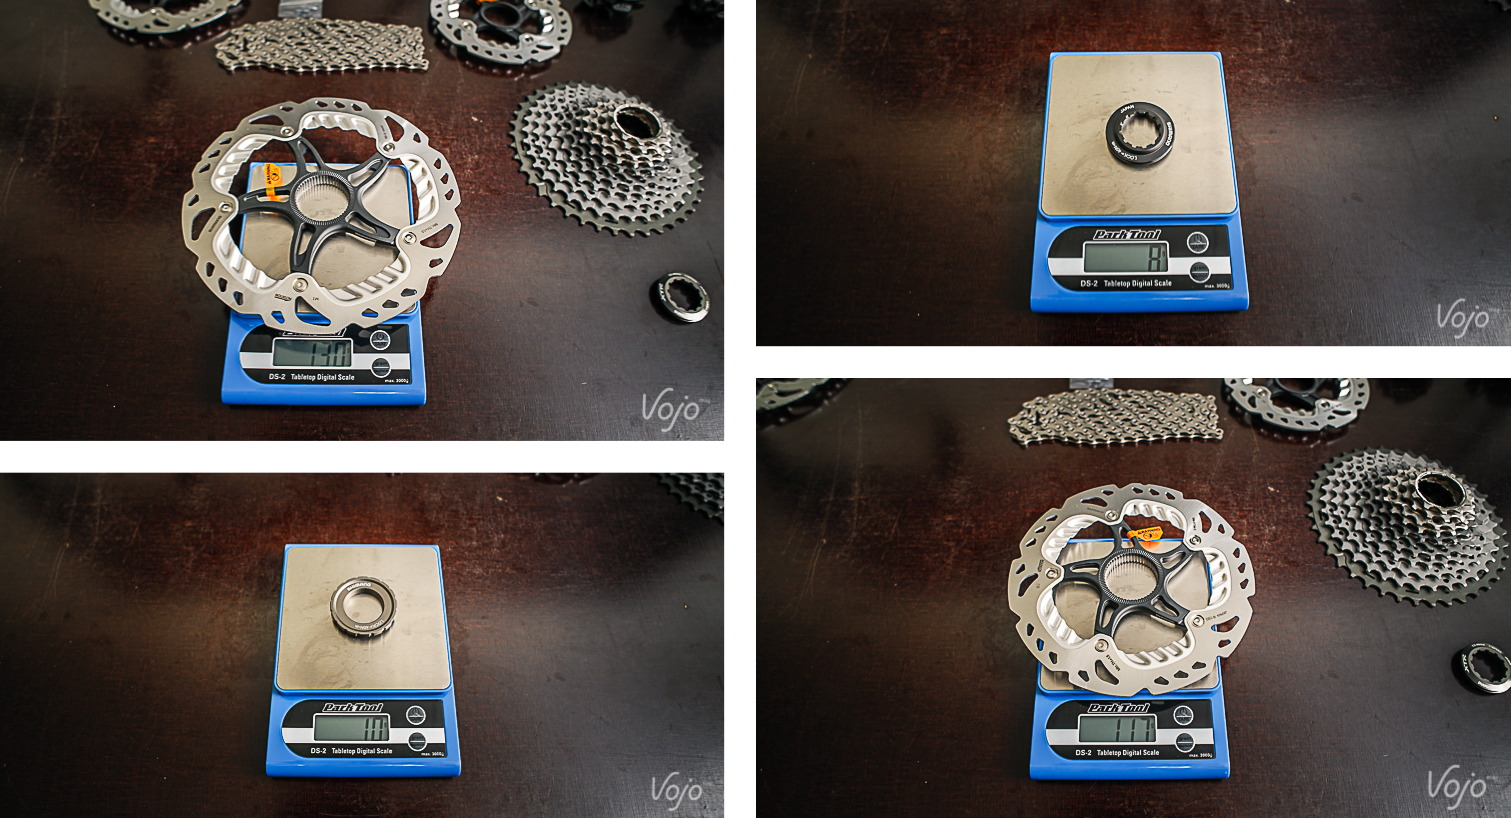 Shimano_XTR_Di2_Compo4_Poids_Vérifies_Verfied_Weight_Copyright_OBeart_VojoMag